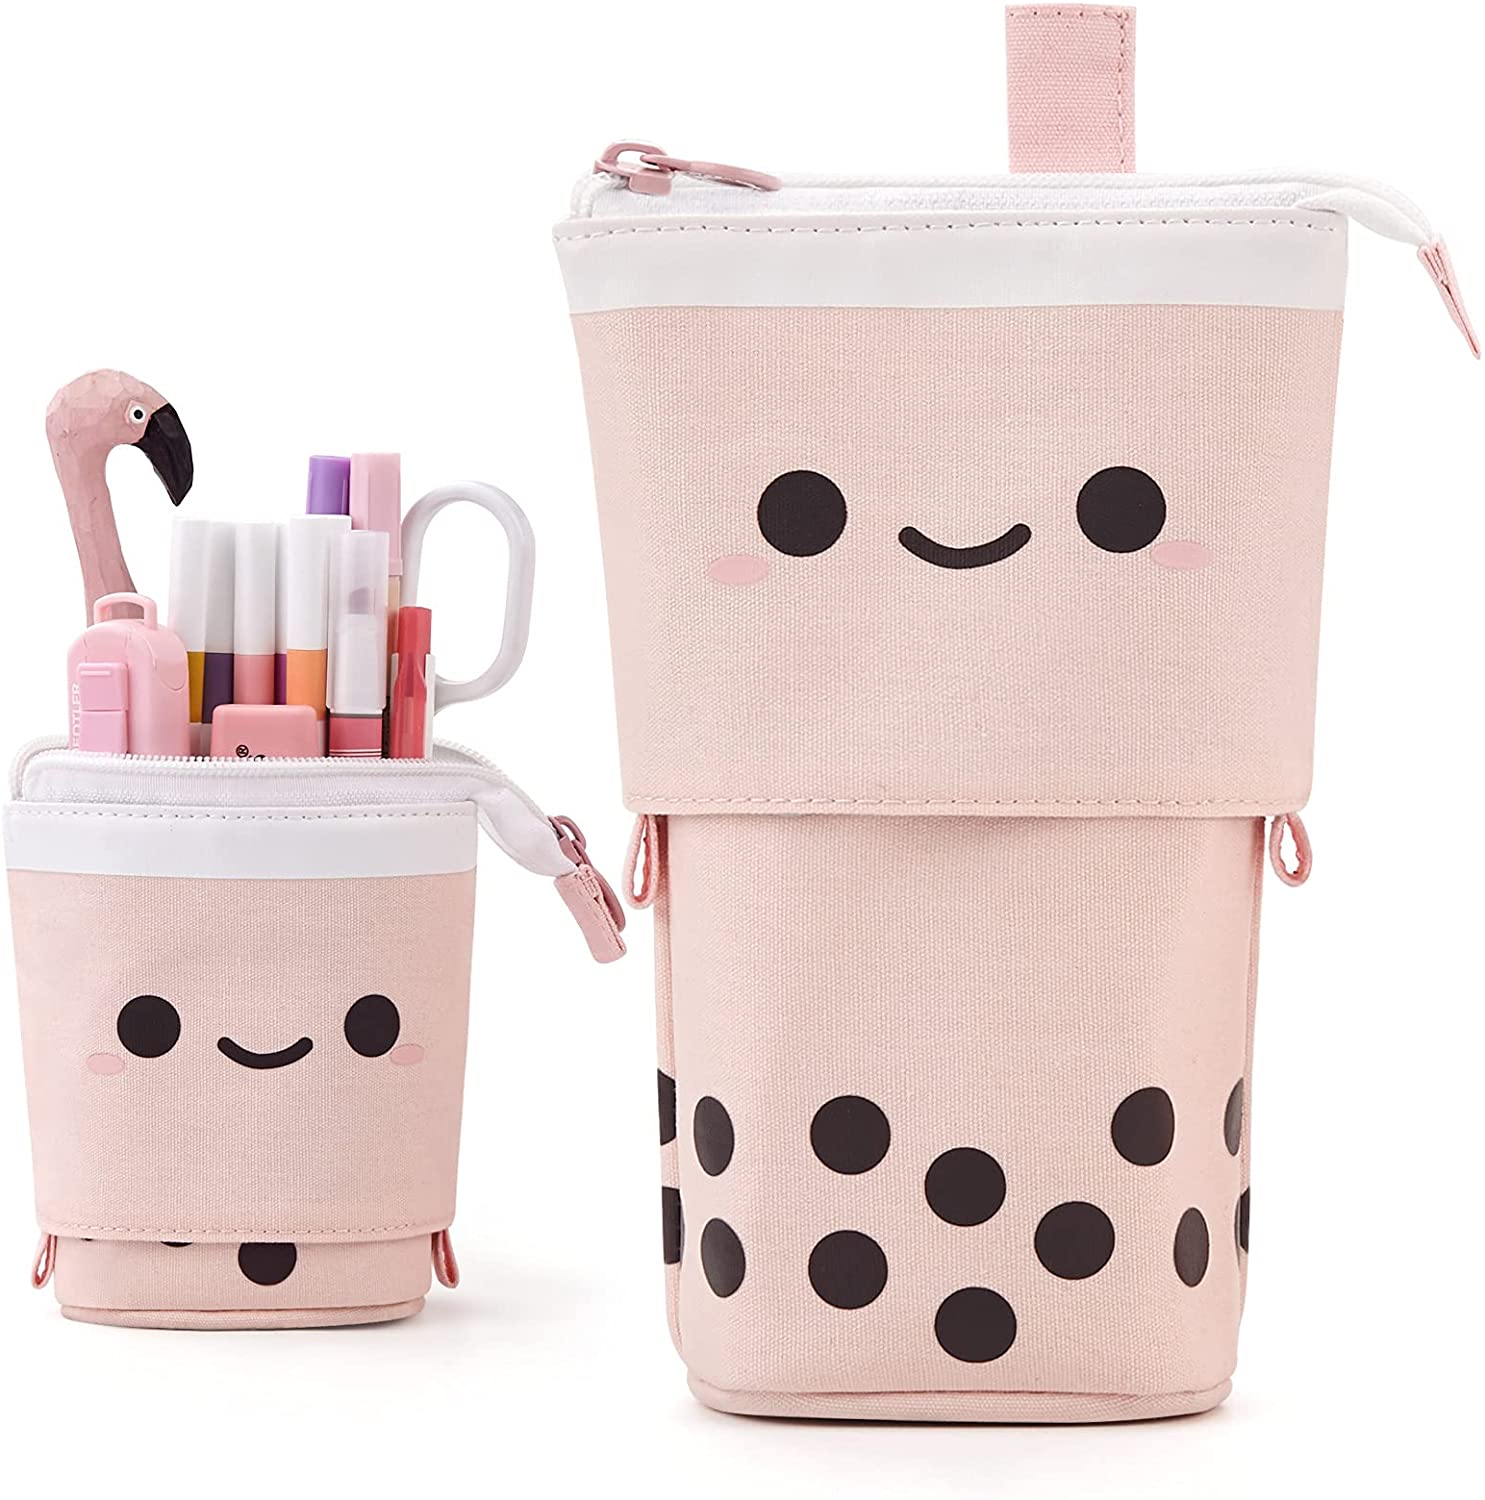 Cute Boba Pencil Case, Pen Makeup Pouch Box Bag Organizer Holder Stuff,  Great Gift for Teens Adult Girls Kids, Easy Clean and Use